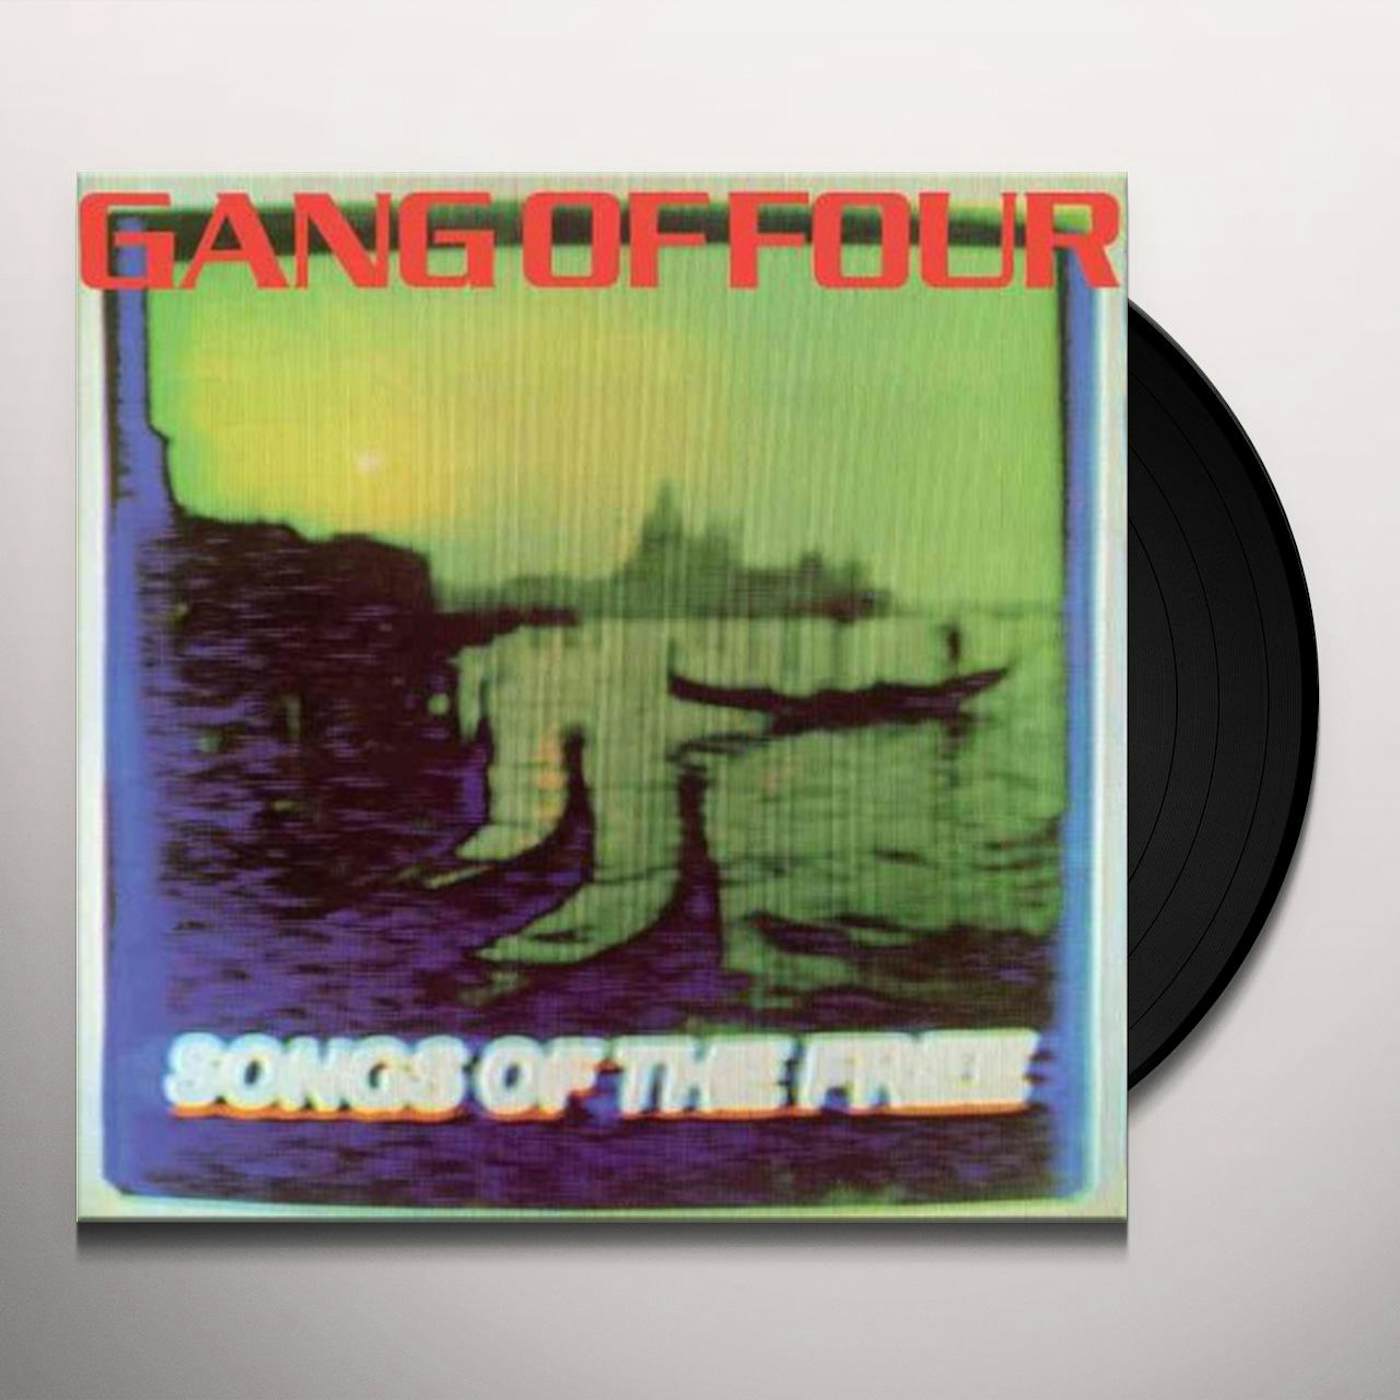 Gang Of Four Songs of The Free Vinyl Record